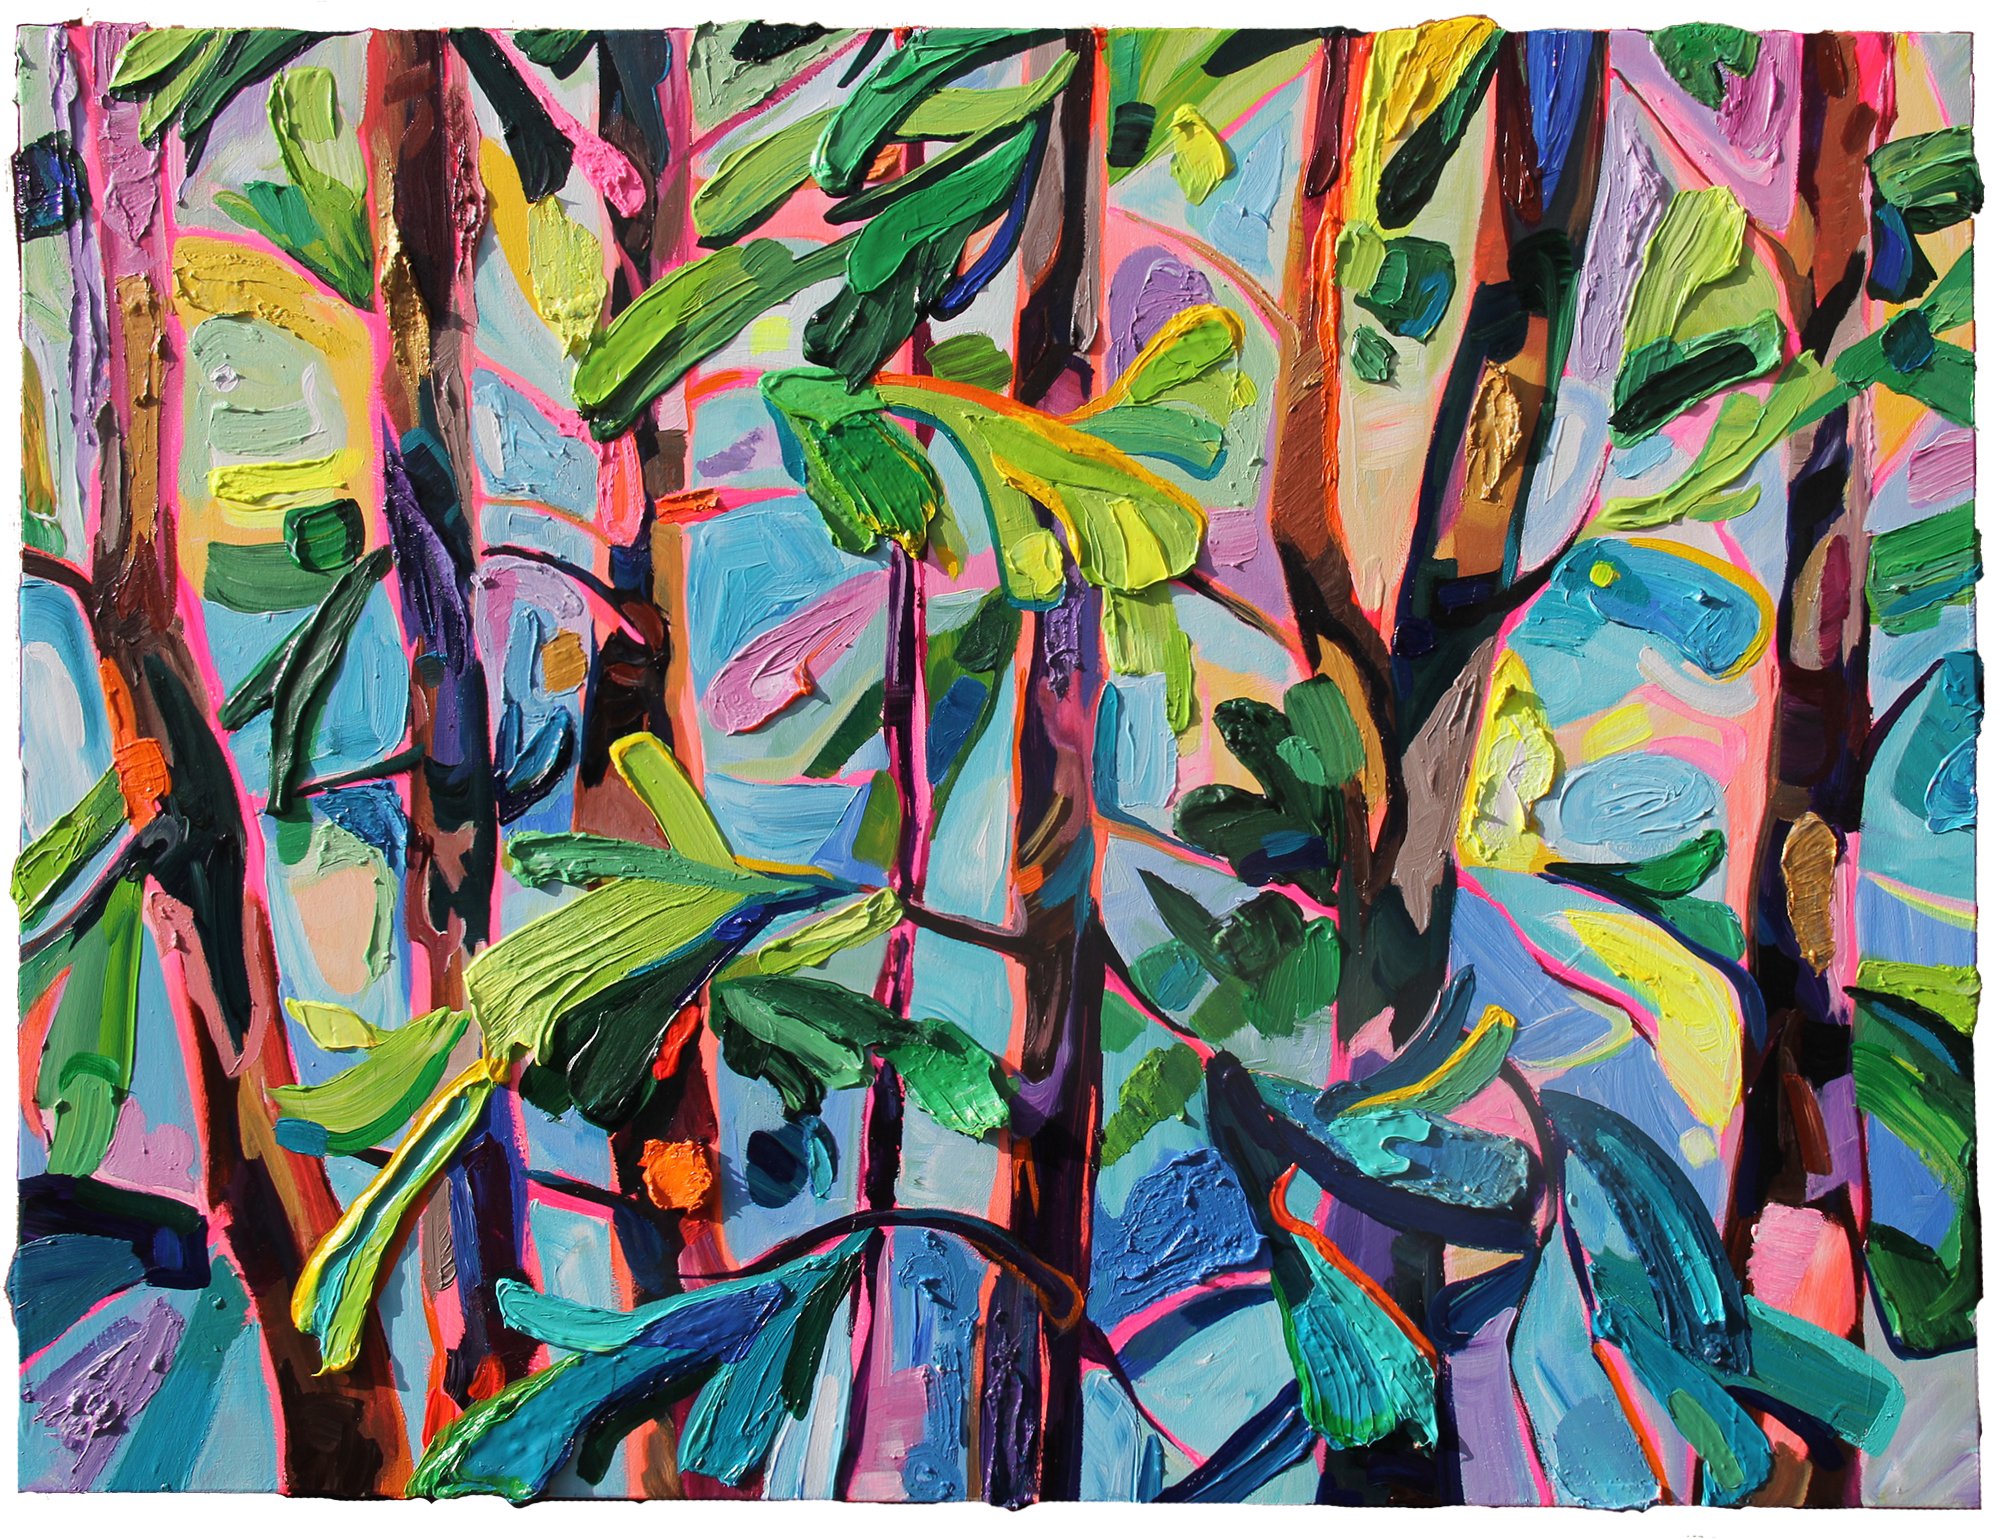 Forest Medley, 30 x 40", acrylic on panel, 2021